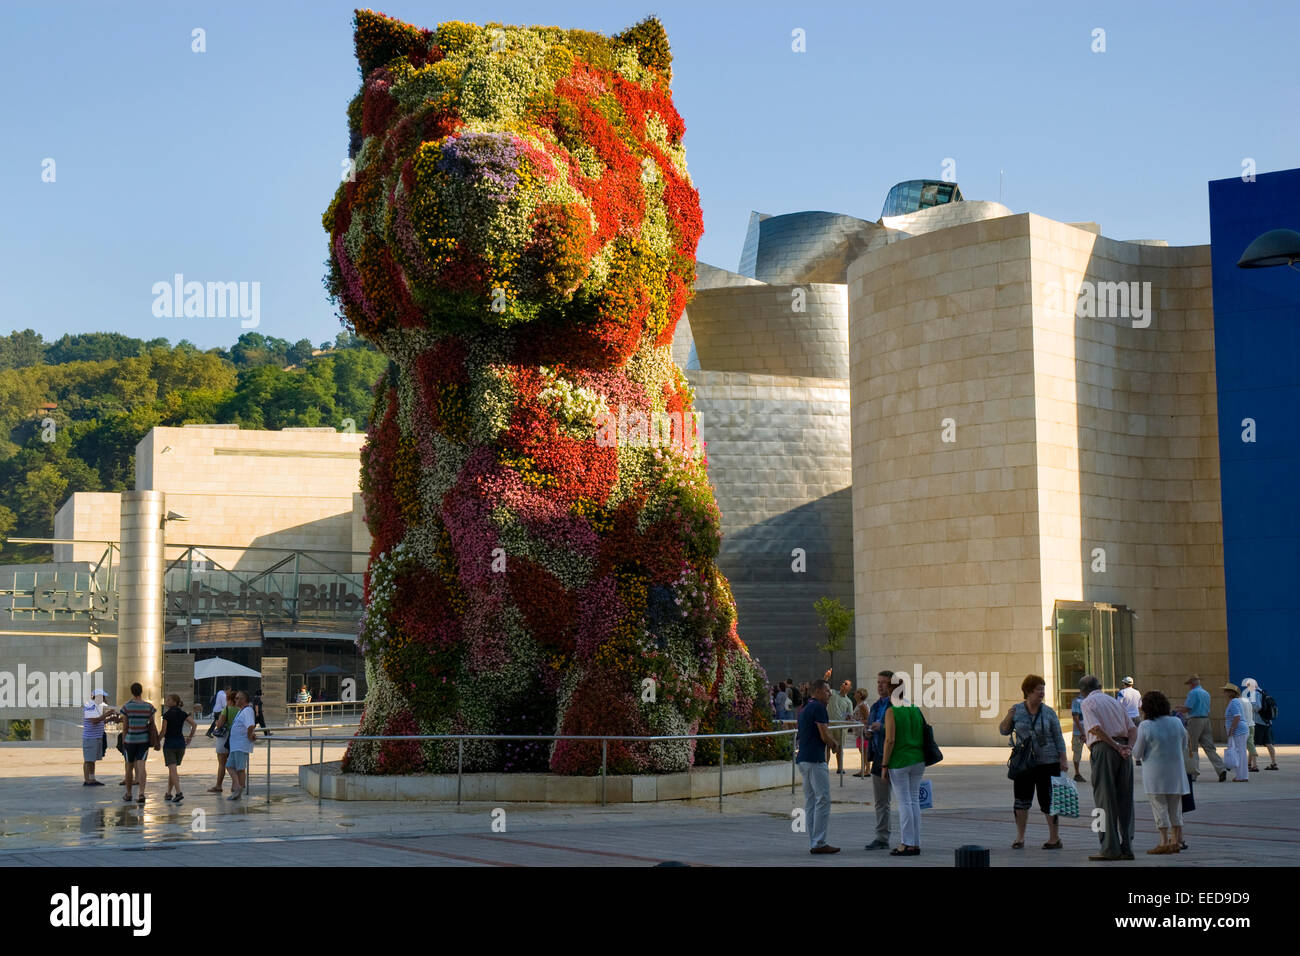 https://c8.alamy.com/comp/EED9D9/a-dog-made-of-flowersplants-at-the-guggenheim-museum-bilbao-a-museum-EED9D9.jpg